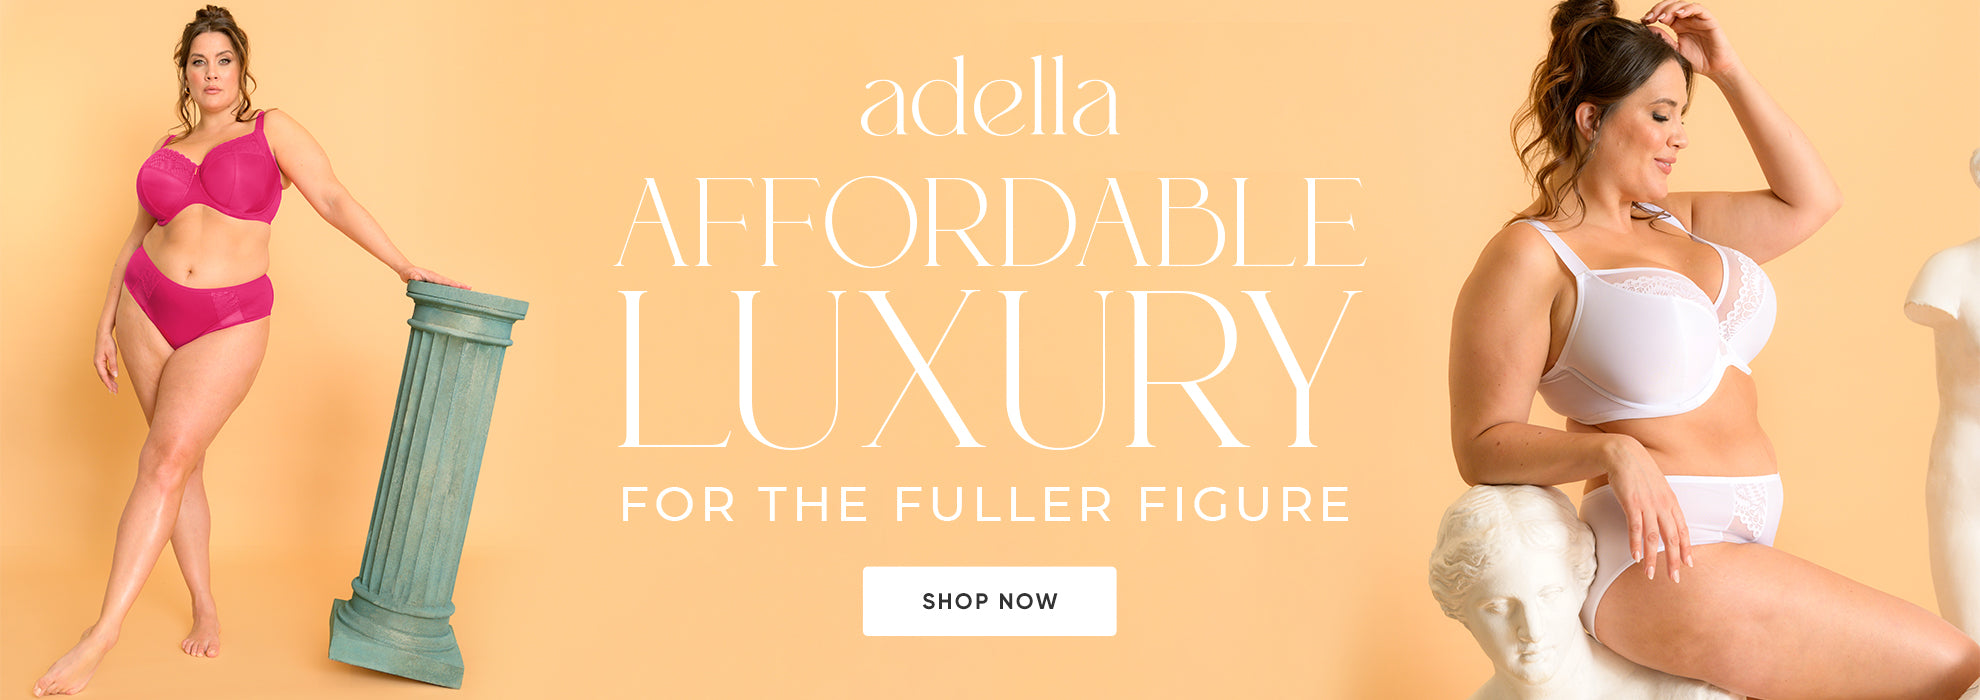 Adella - Affordable Luxury for the fuller figure